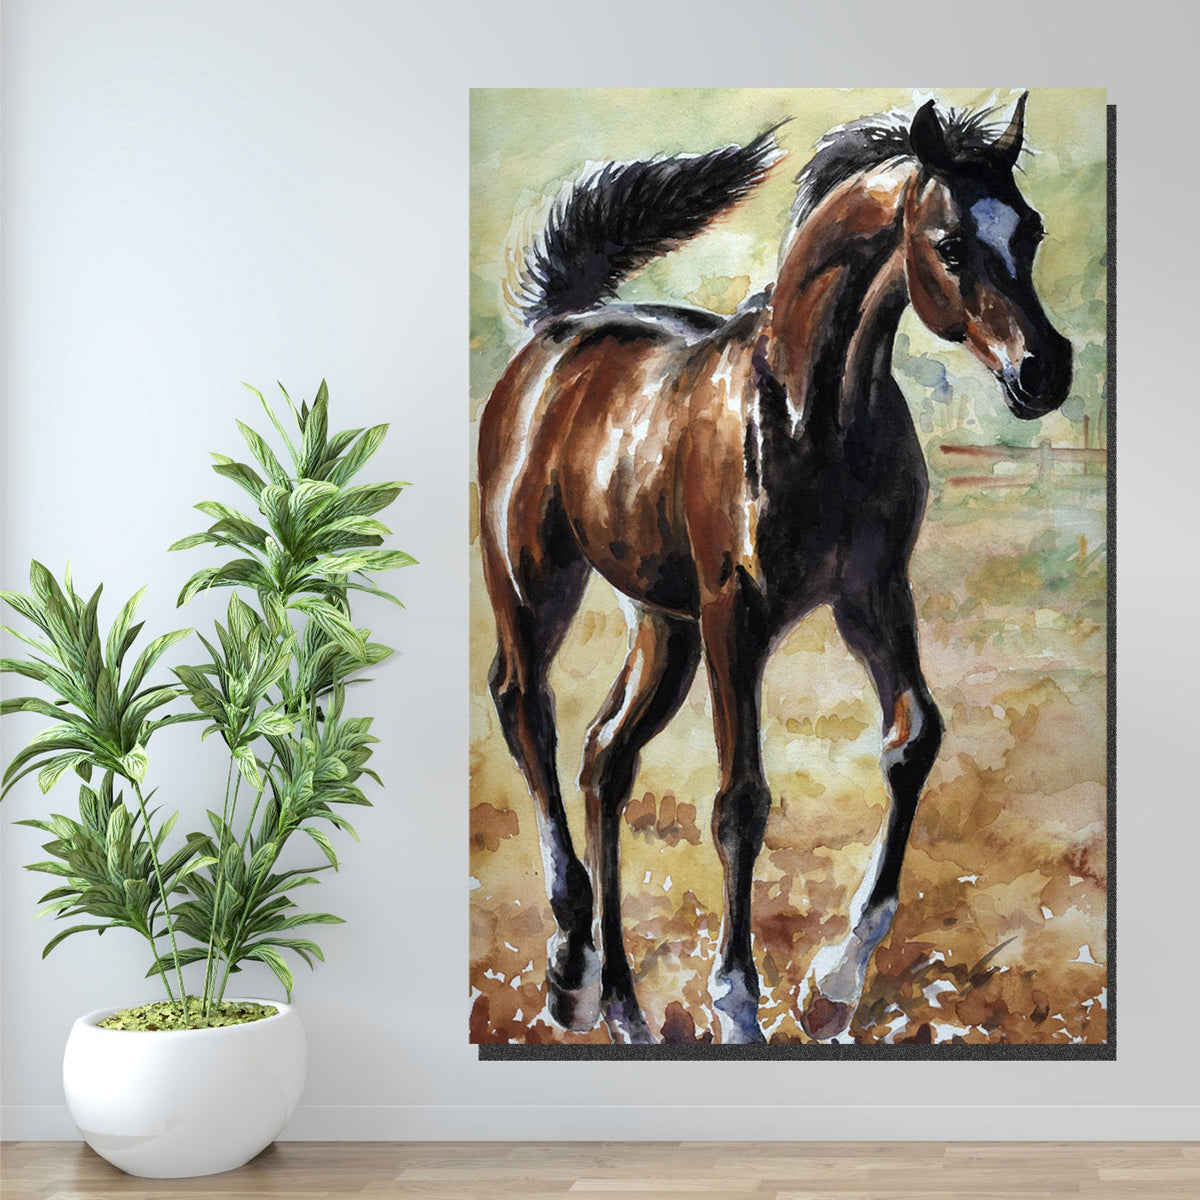 https://cdn.shopify.com/s/files/1/0387/9986/8044/products/YoungFoalCanvasArtprintStretched-4.jpg